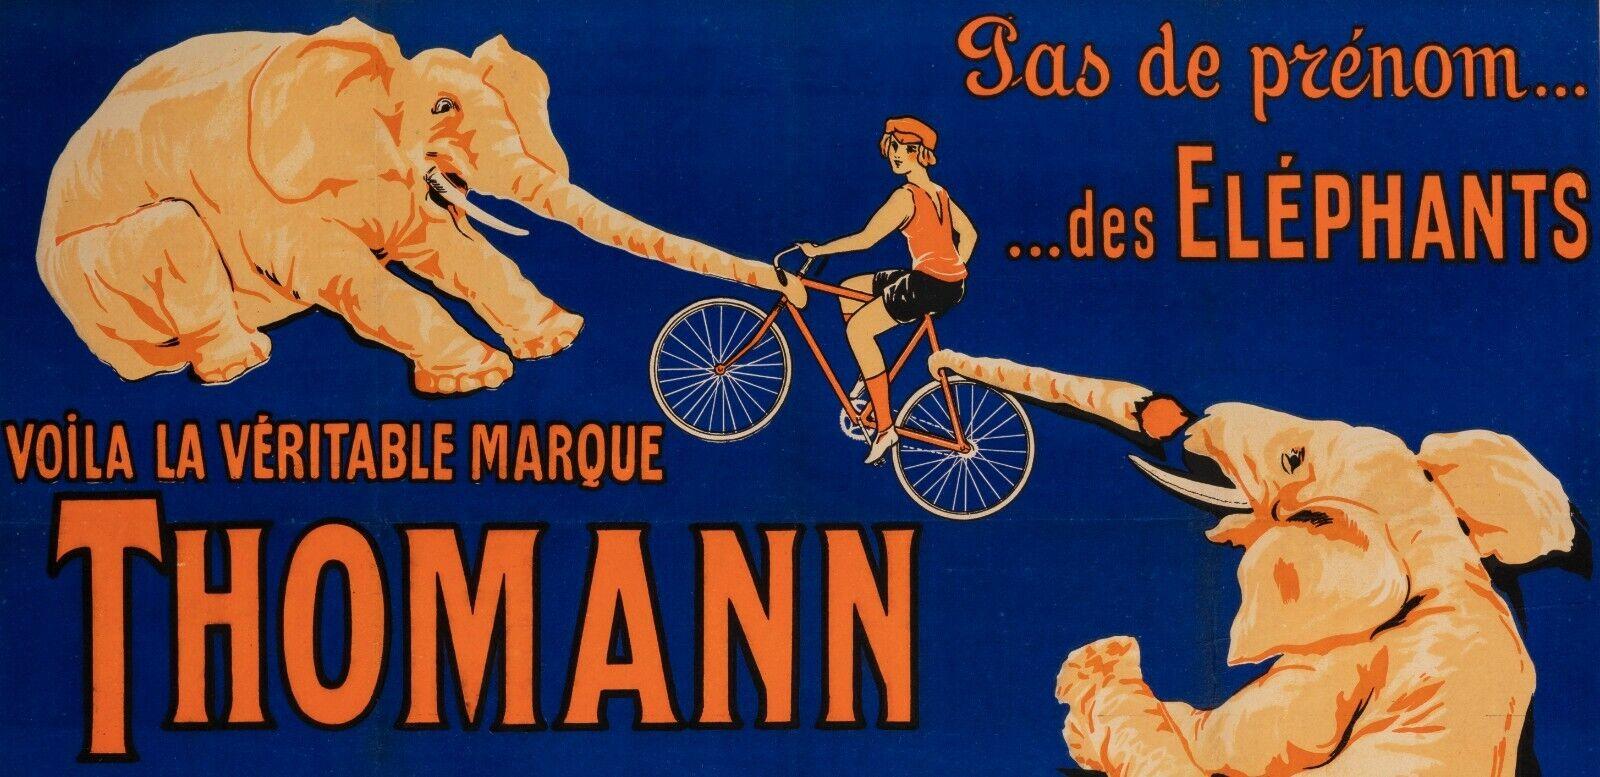 Original Vintage Poster-Cycles Motos Thomann-Elephant-Bike, 1926

Advertising poster to promote the cycles and motorcycles of the Thomann brand created by Alphonse Thomann in 1908.
 The poster specifies Thomann 